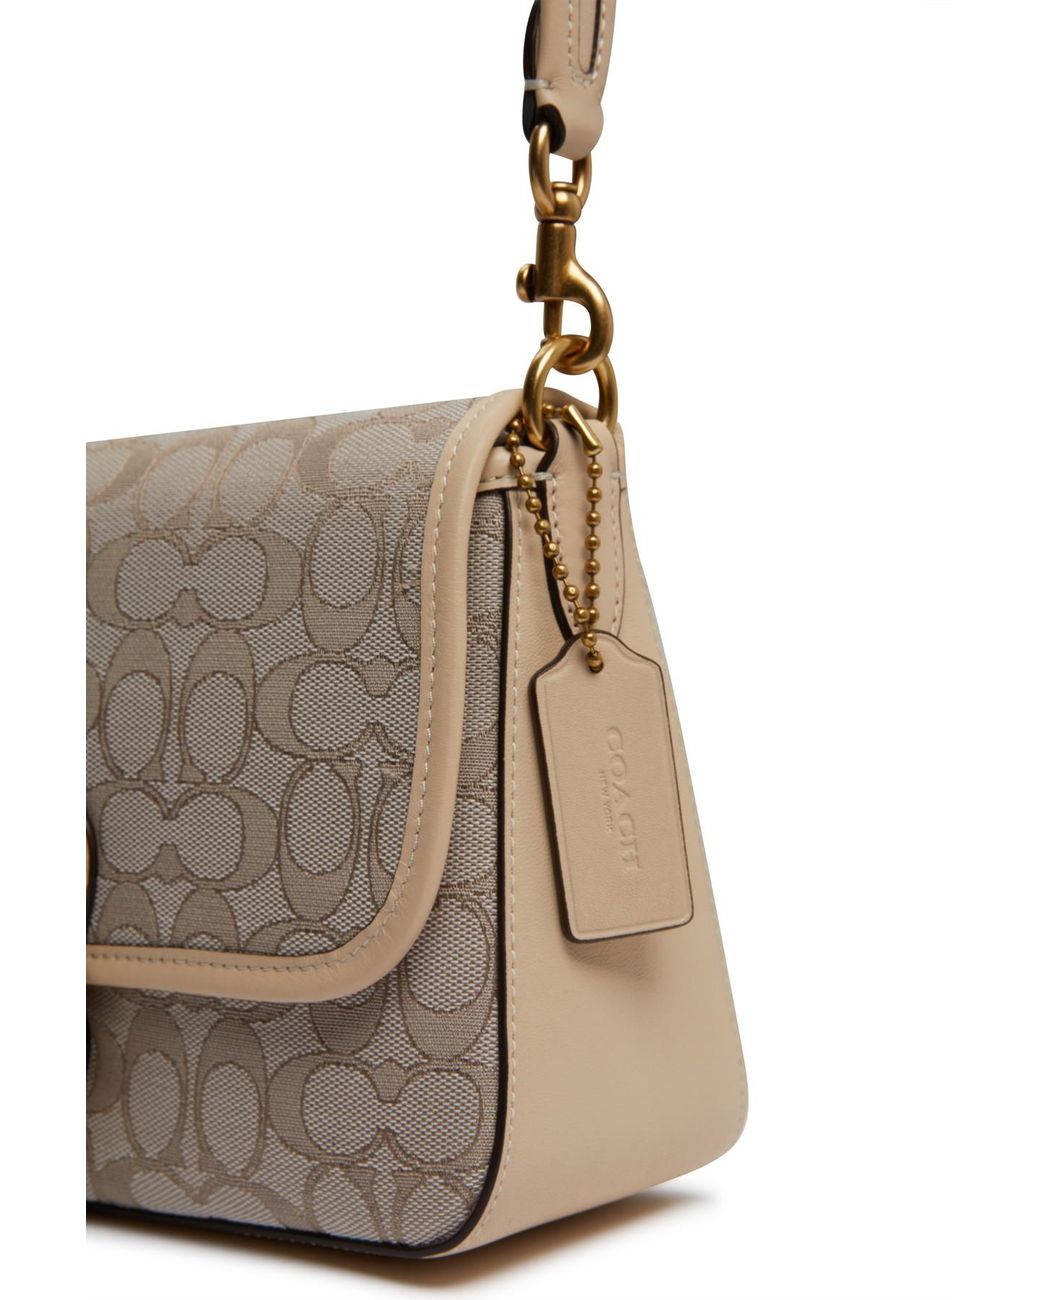 COACH Soft Tabby Shoulder Bag In Signature Jacquard